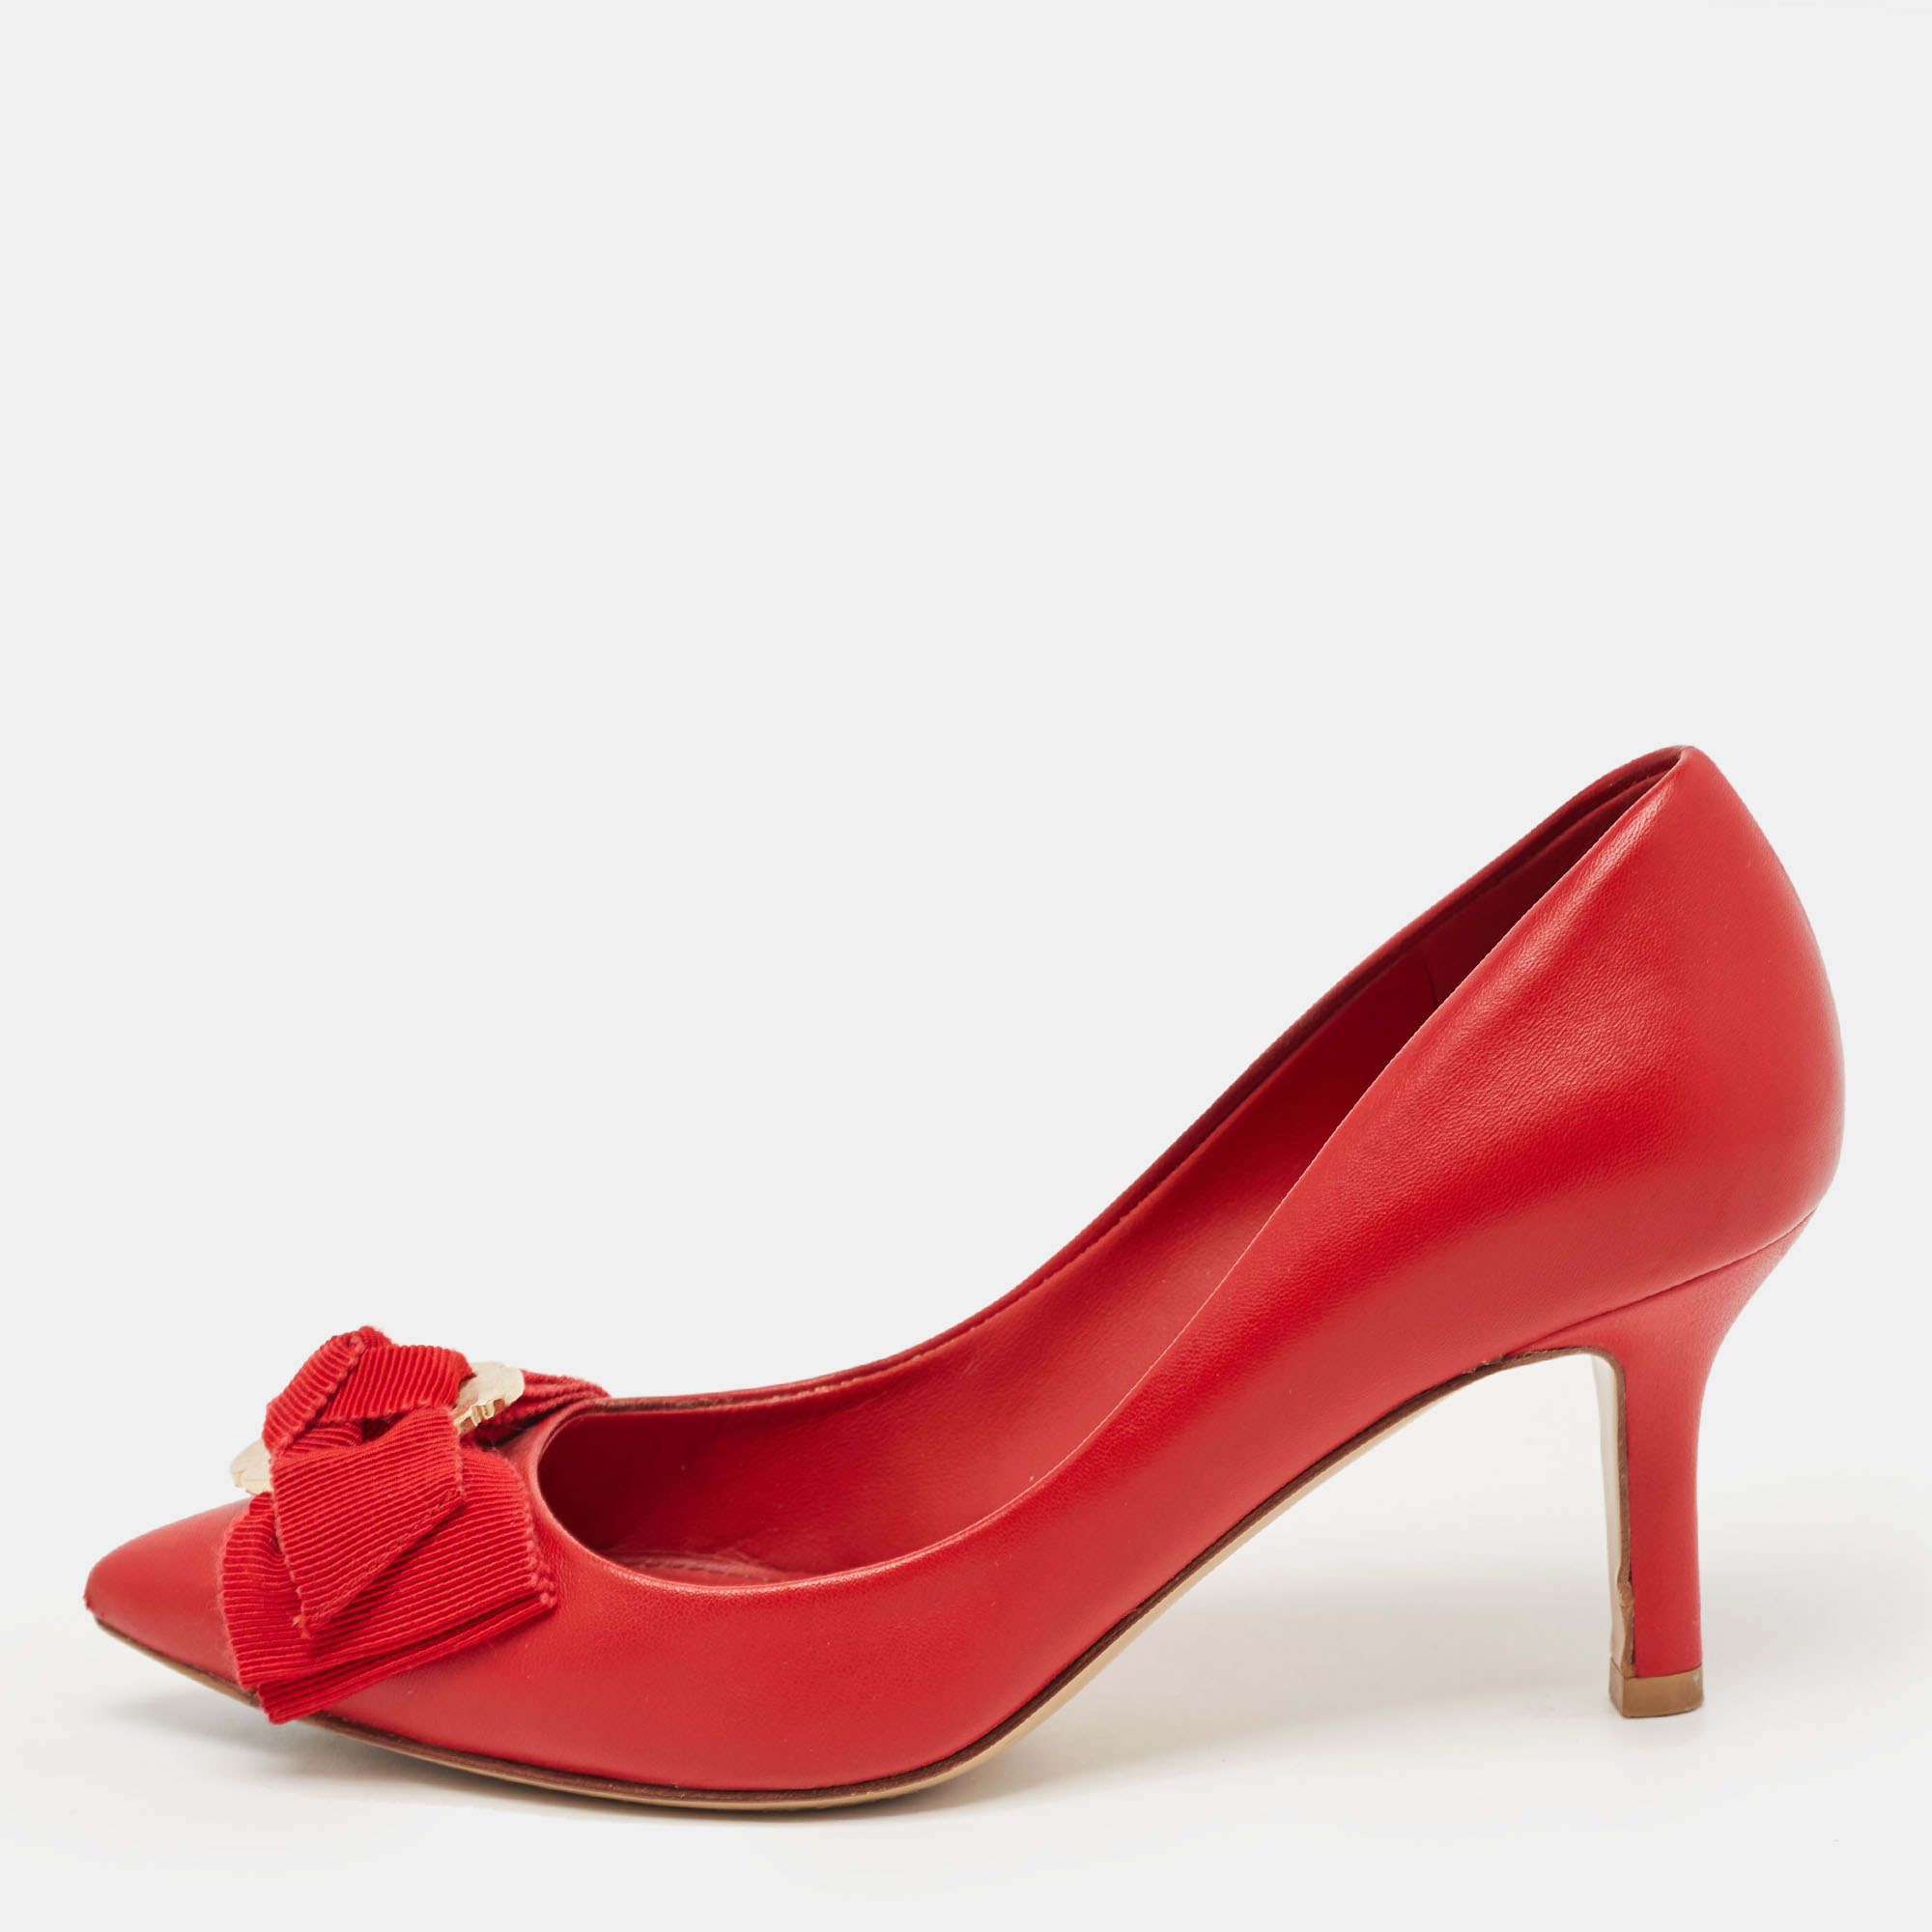 Salvatore Ferragamo Red Leather Pointed Toe Pumps Size 35.5